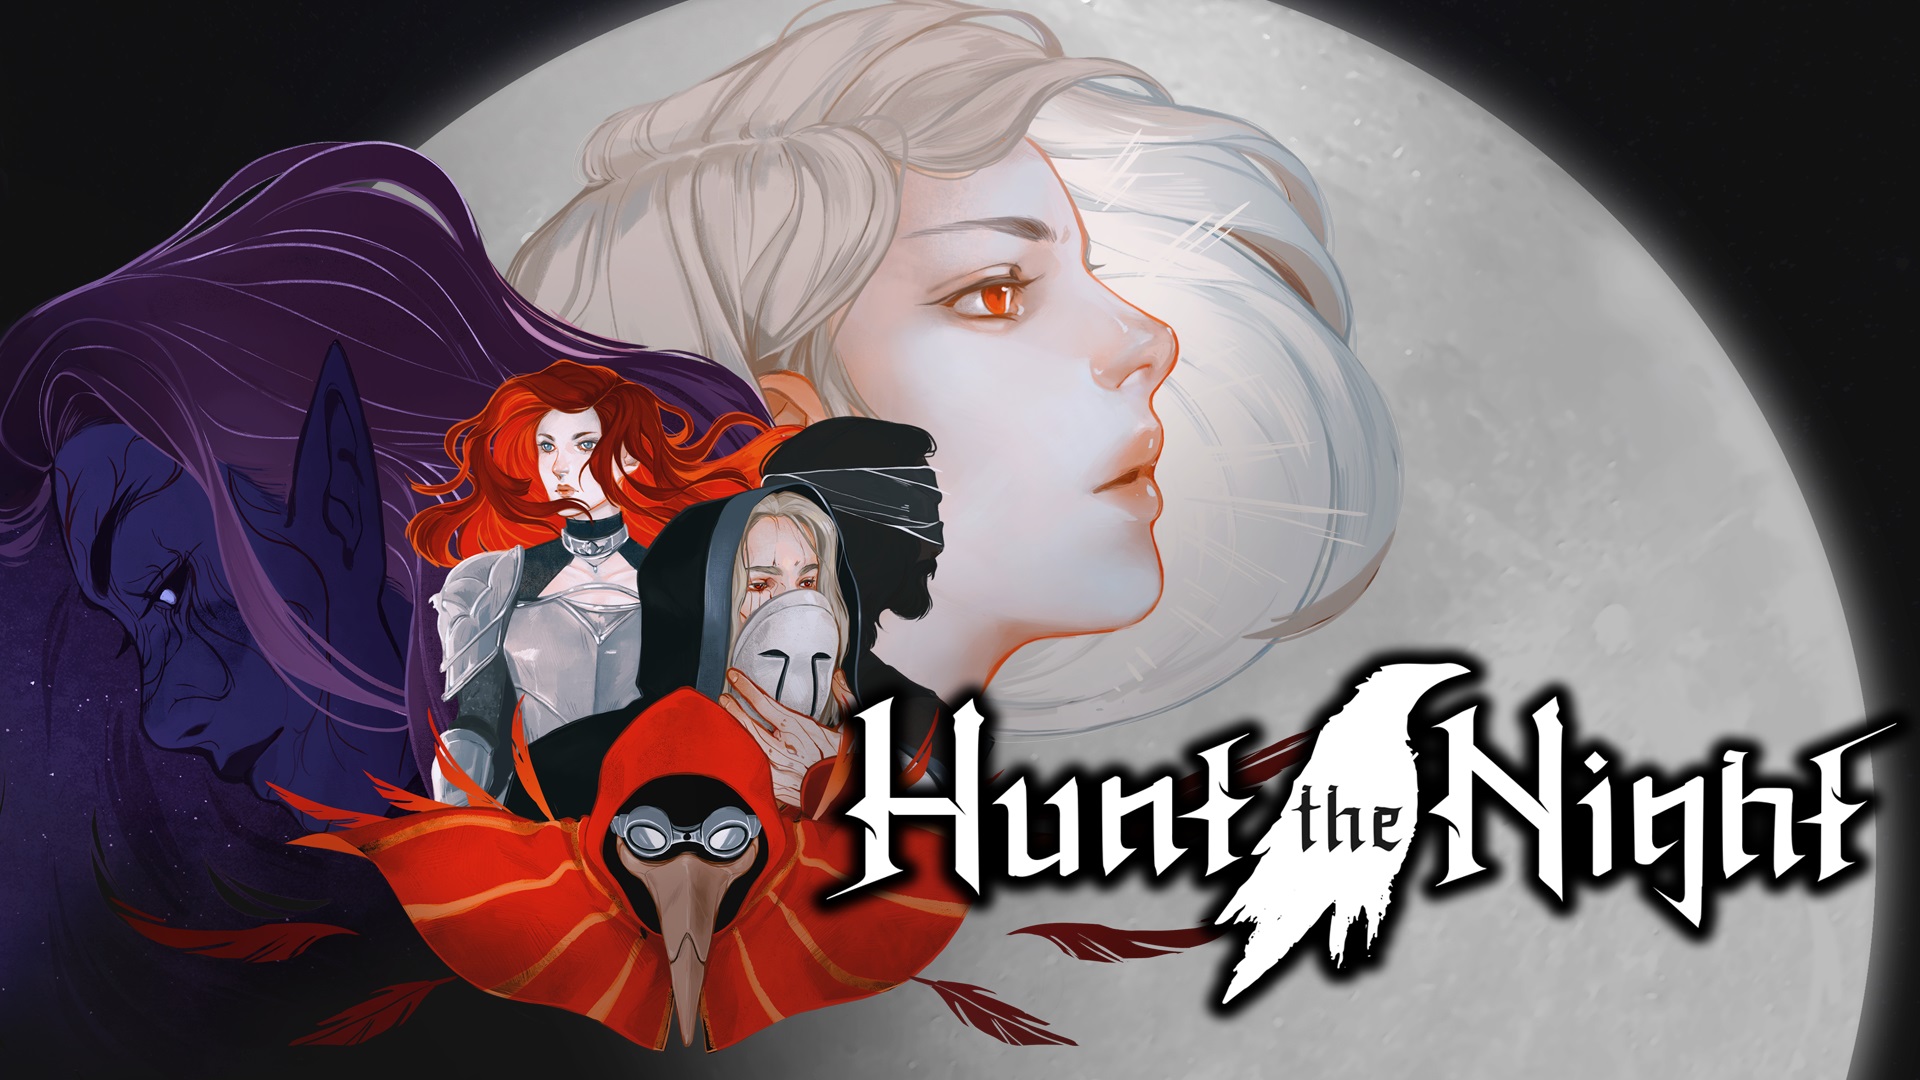 Life together the hunt. Night Hunt. Dangen Entertainment игры. Night of the Hunted 2023. Hunt the Night Art.